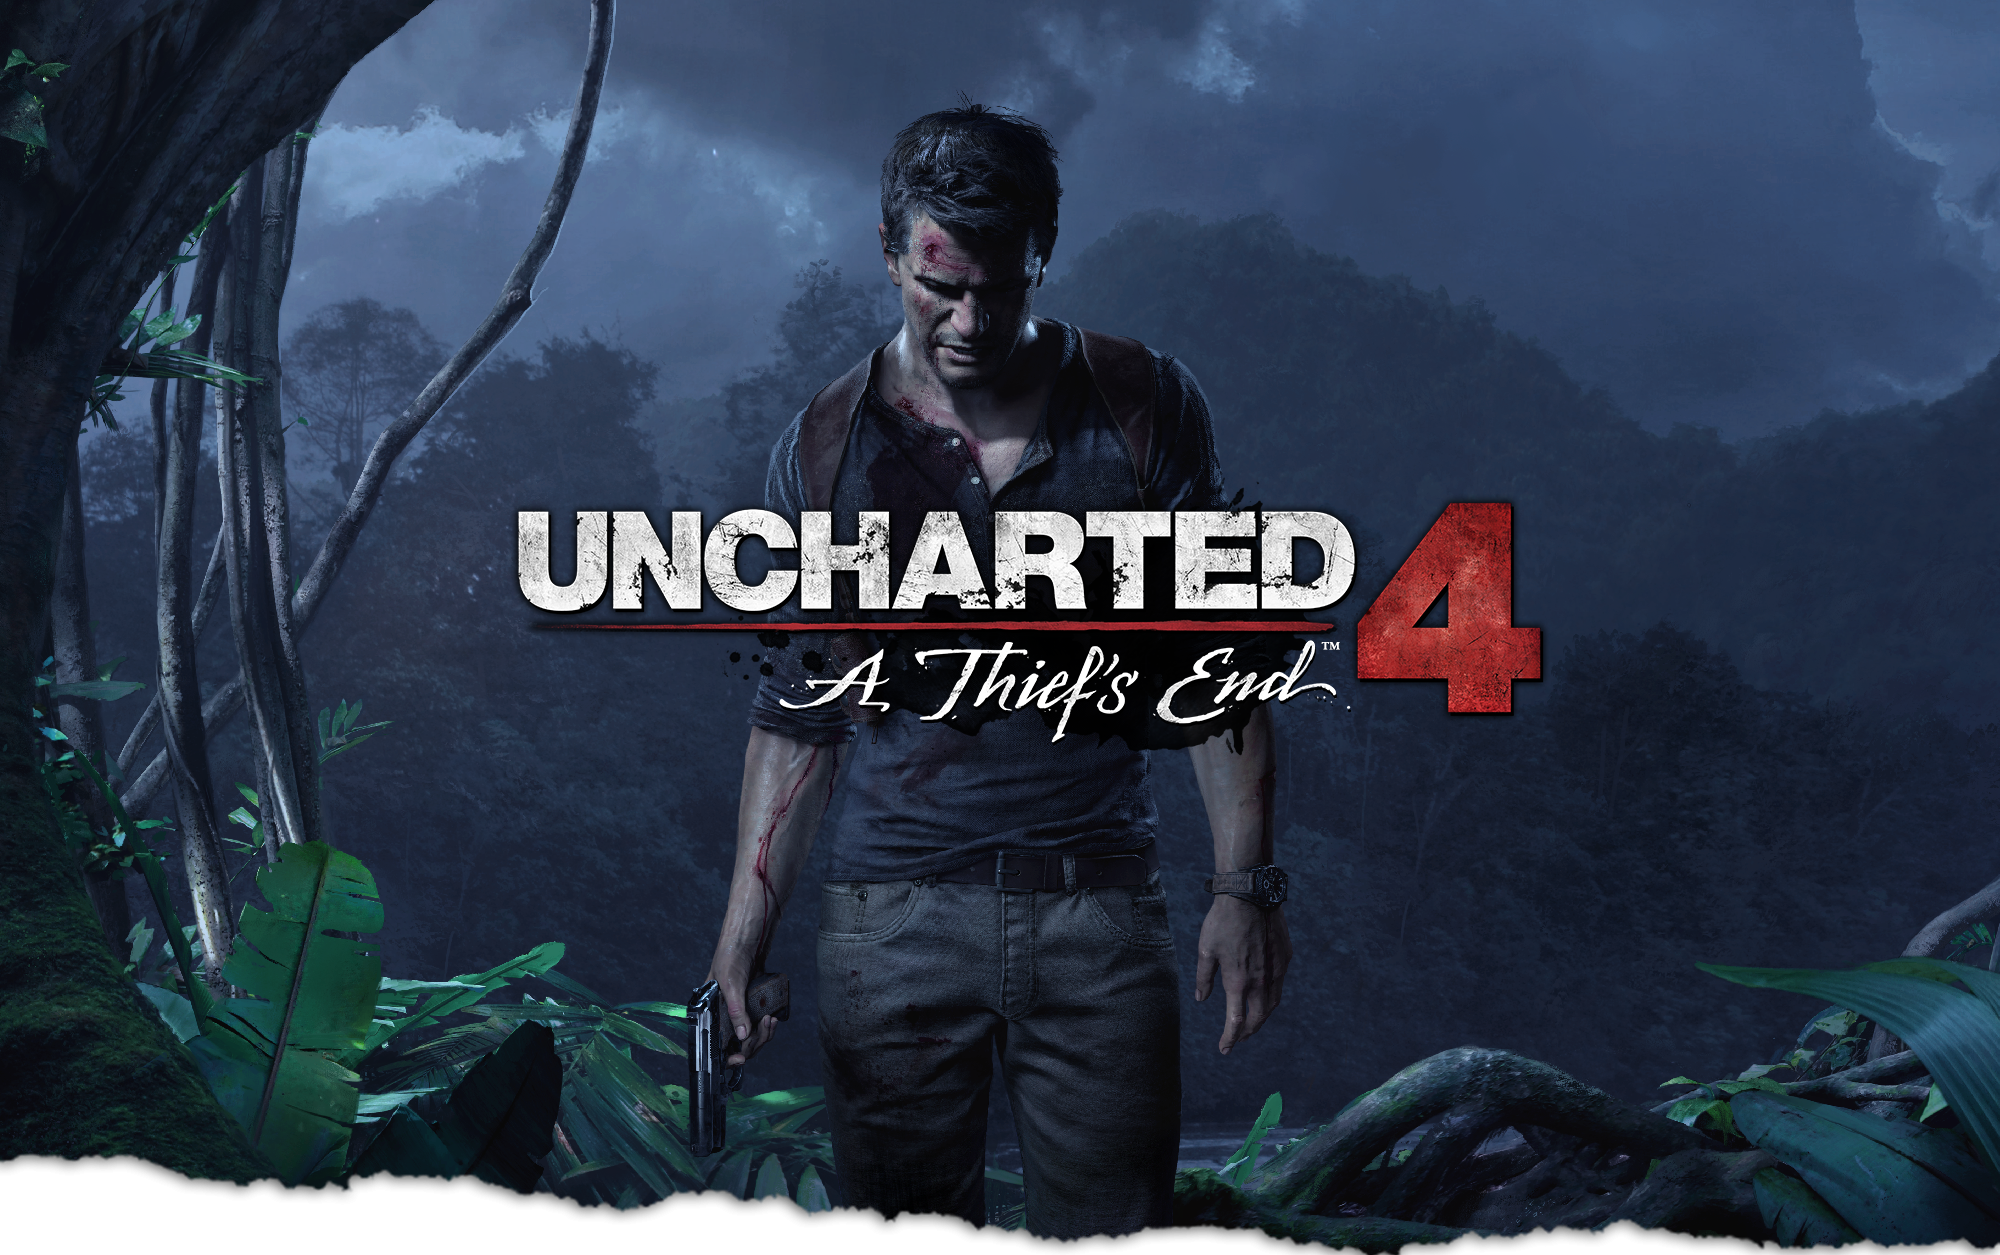 How many uncharted games are there